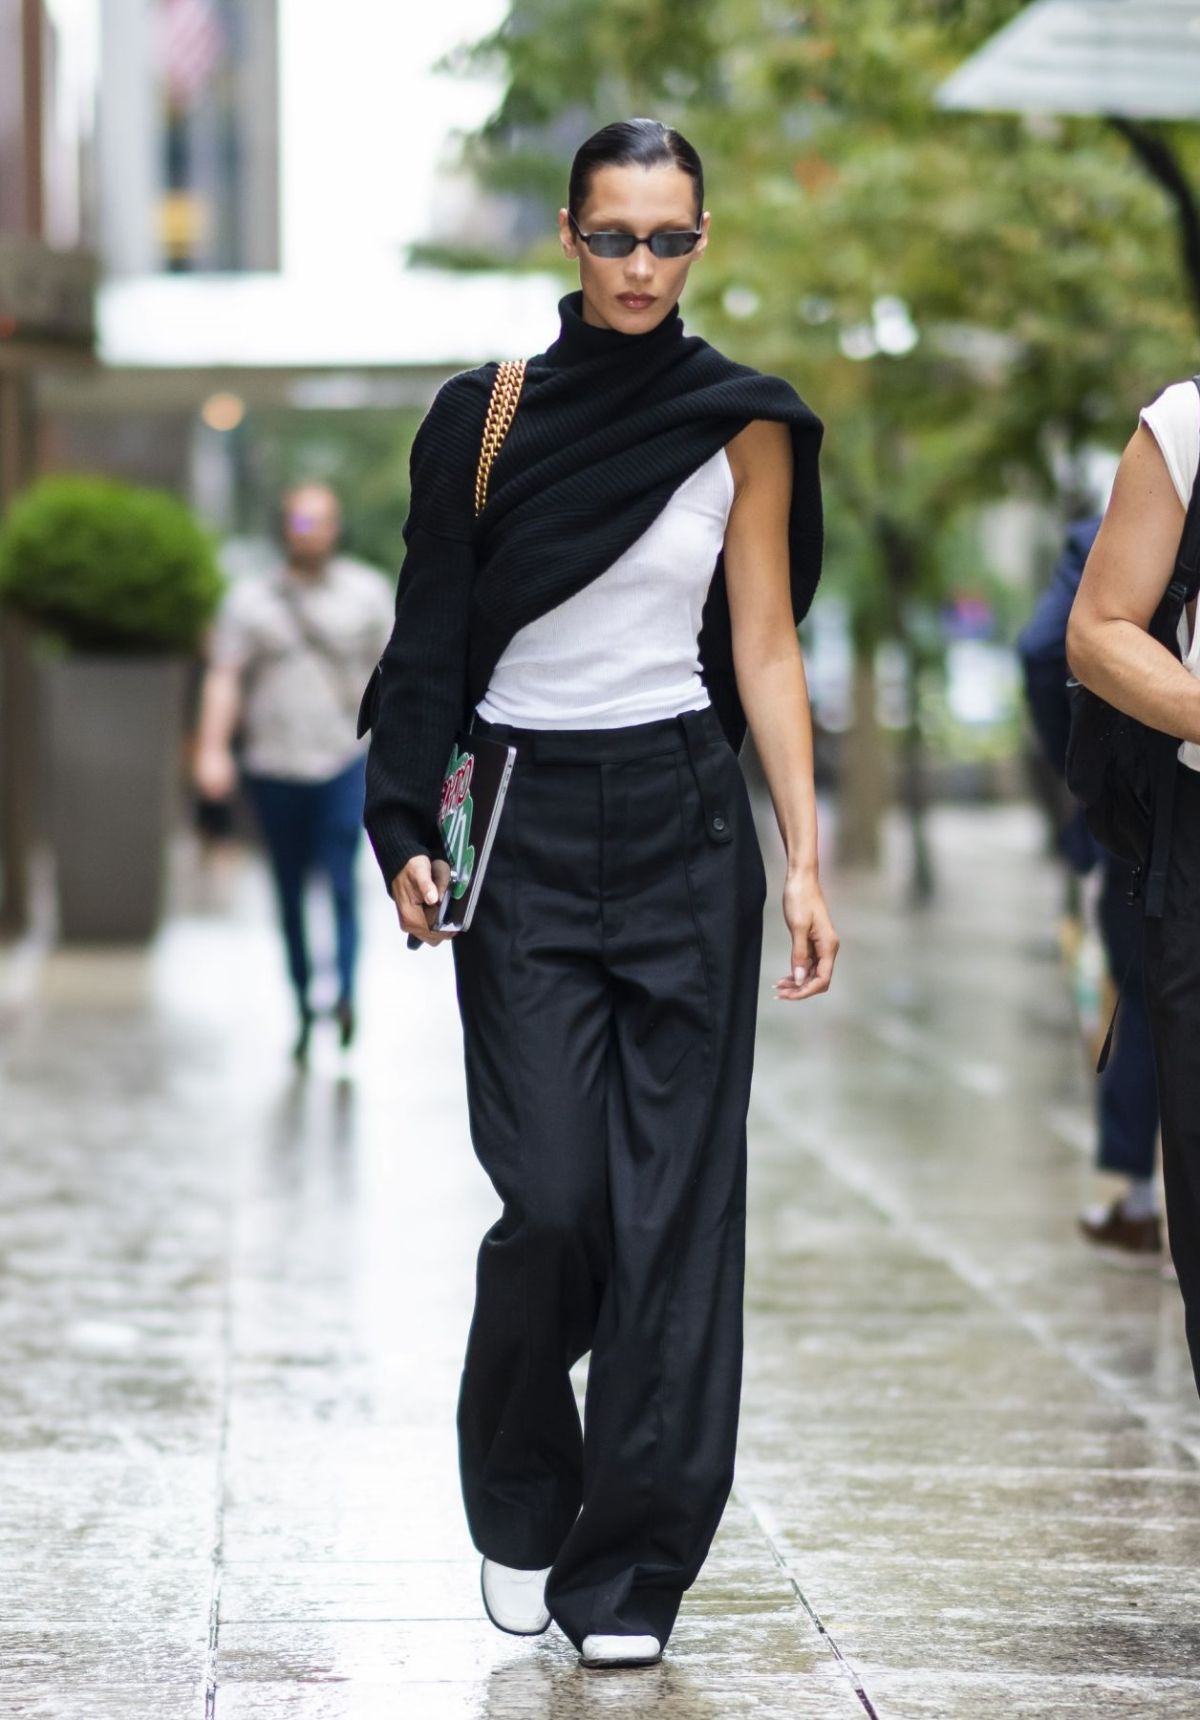 Bella Hadid wears White Tank Top, Black Sweater and Black Wide-Leg Pants Minimal Outfit